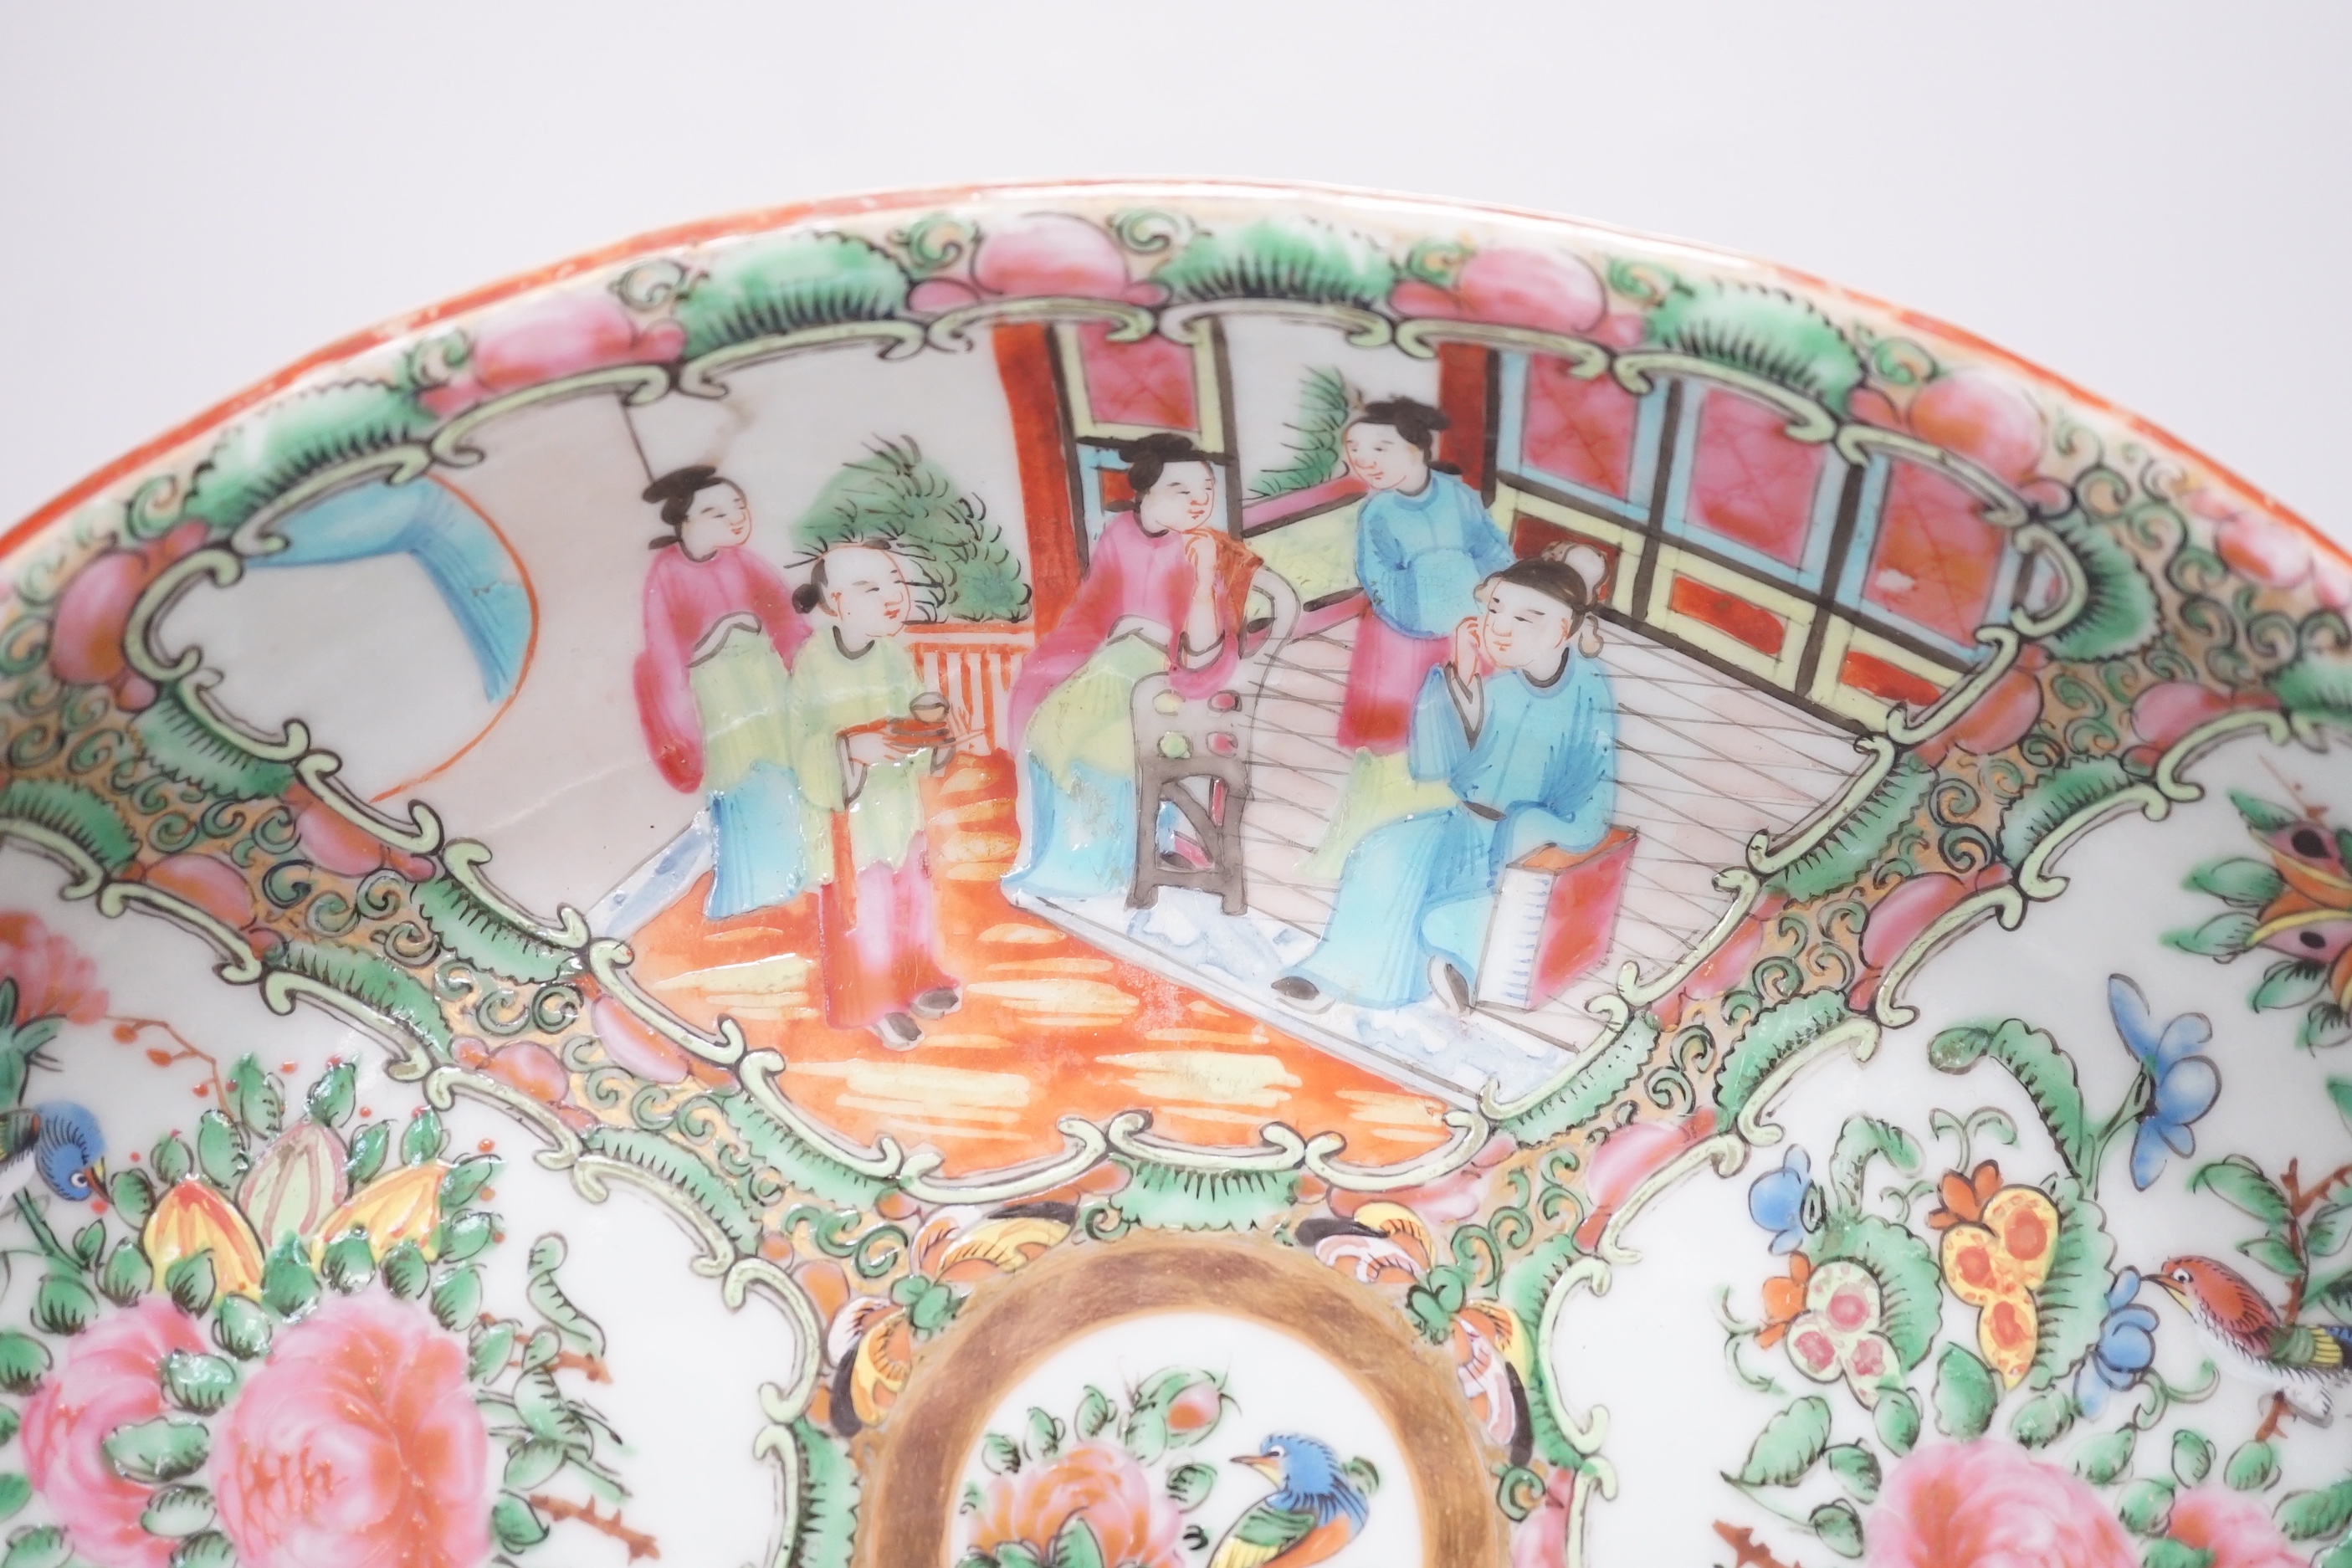 A 19th century Canton export dish, 28cm wide